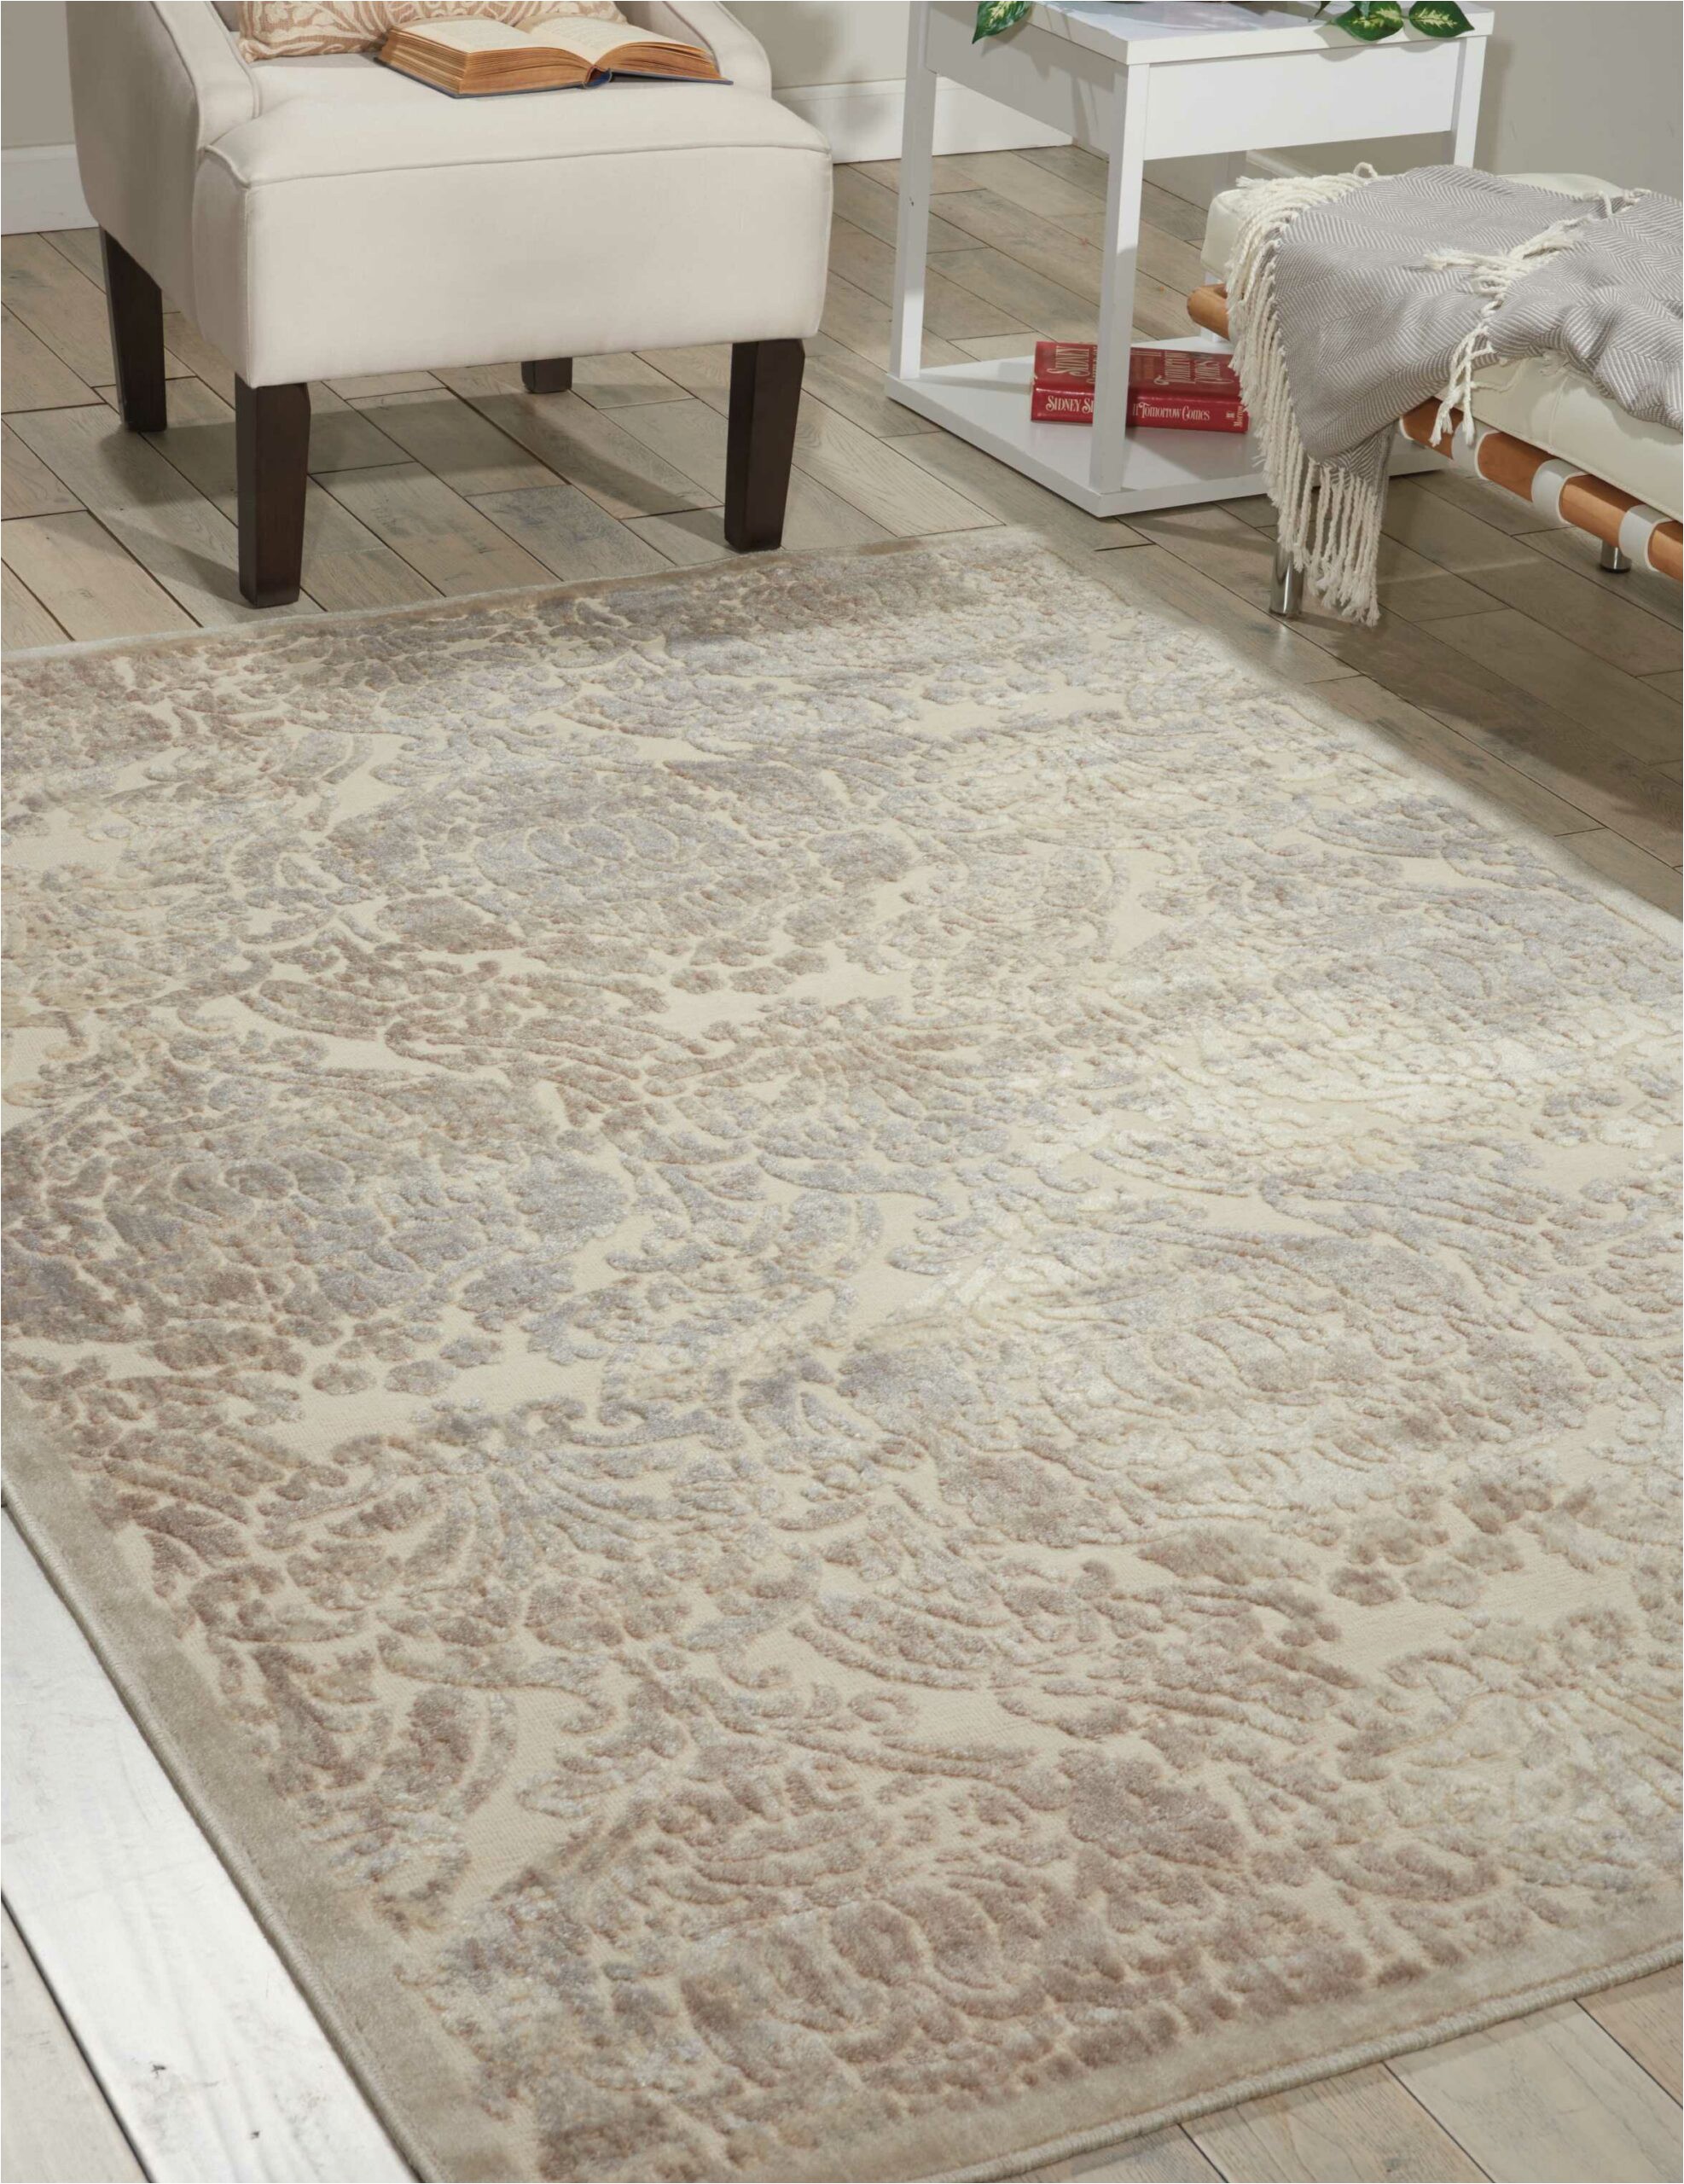 Jcpenney Bathroom Runner Rugs Drug Rugs for Women area Rug Cleaning fort Lauderdale